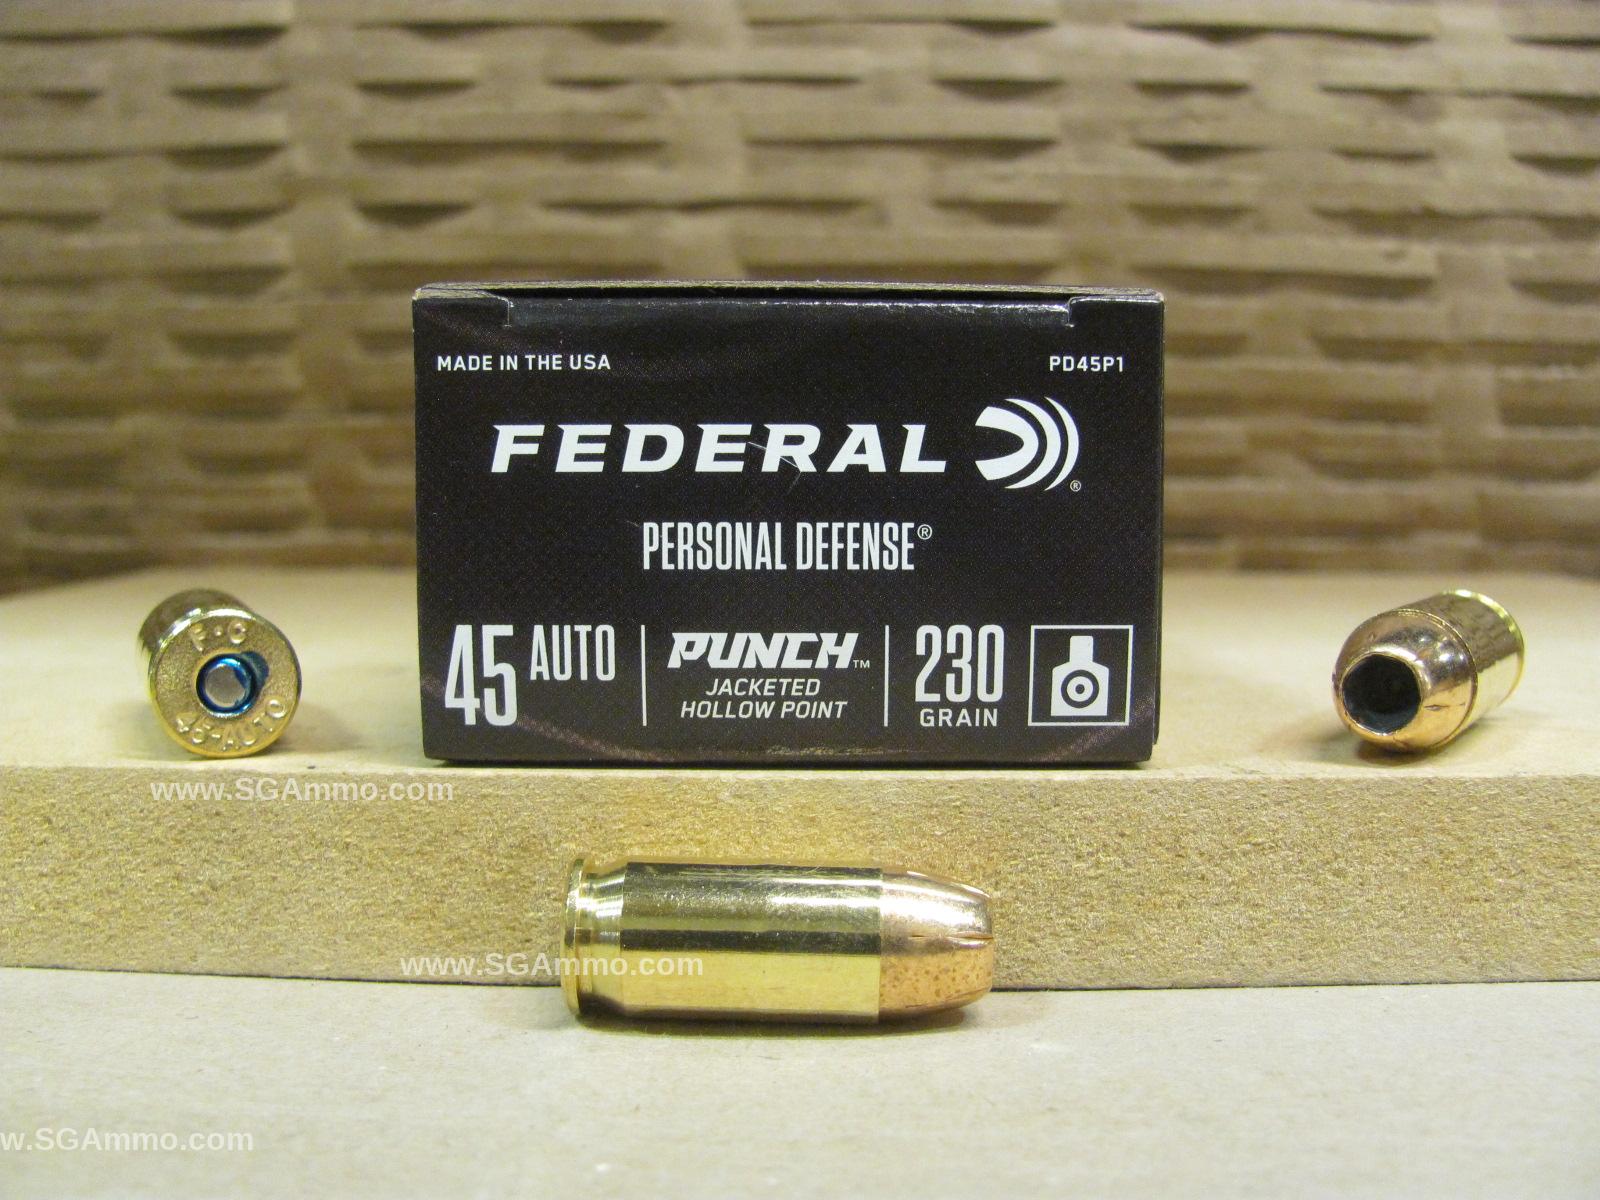 200 Round Case 45 Auto 230 Grain Punch Jacketed Hollow Point Federal